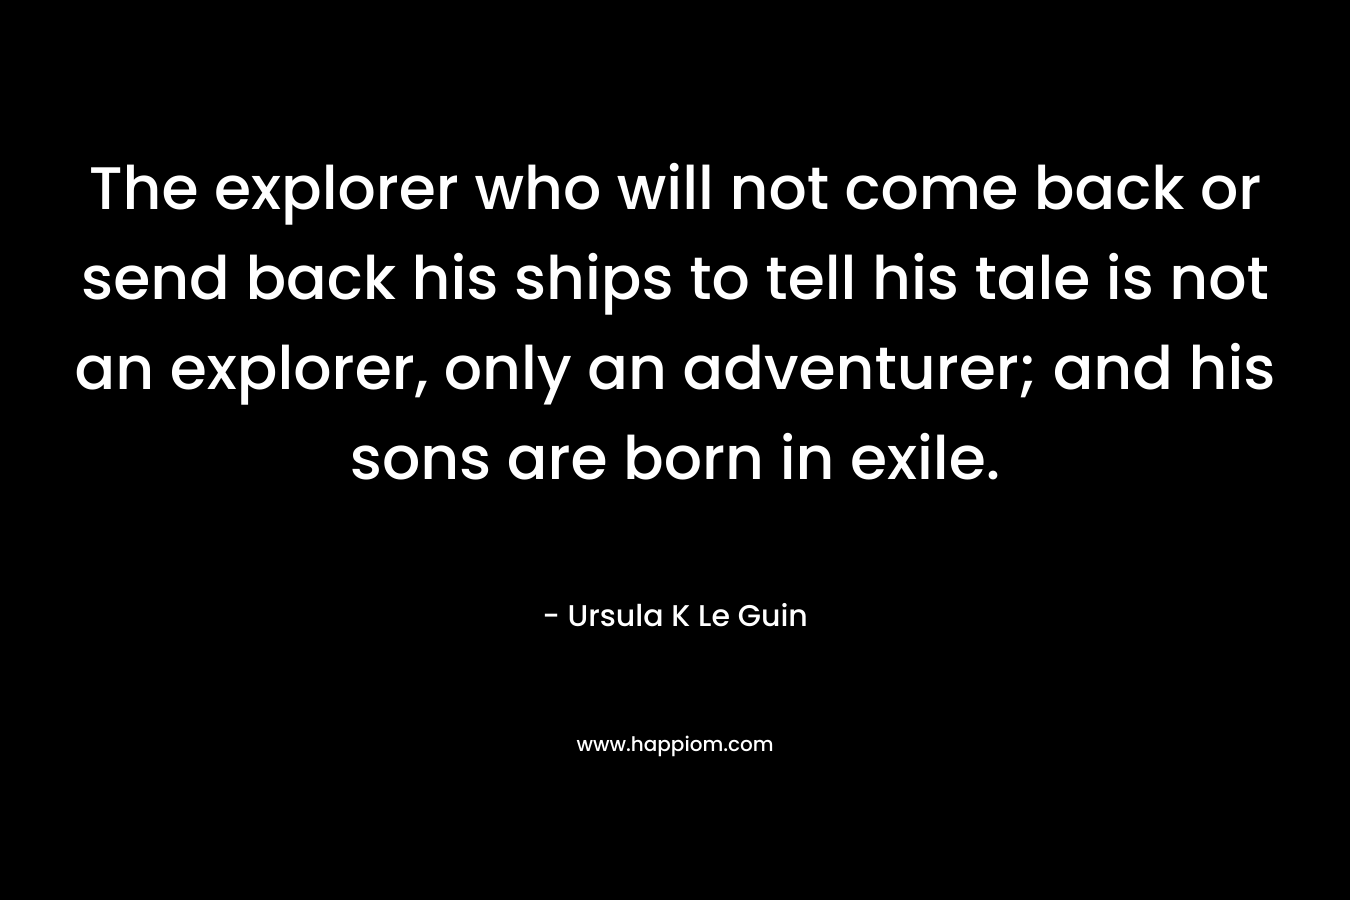 The explorer who will not come back or send back his ships to tell his tale is not an explorer, only an adventurer; and his sons are born in exile. – Ursula K Le Guin